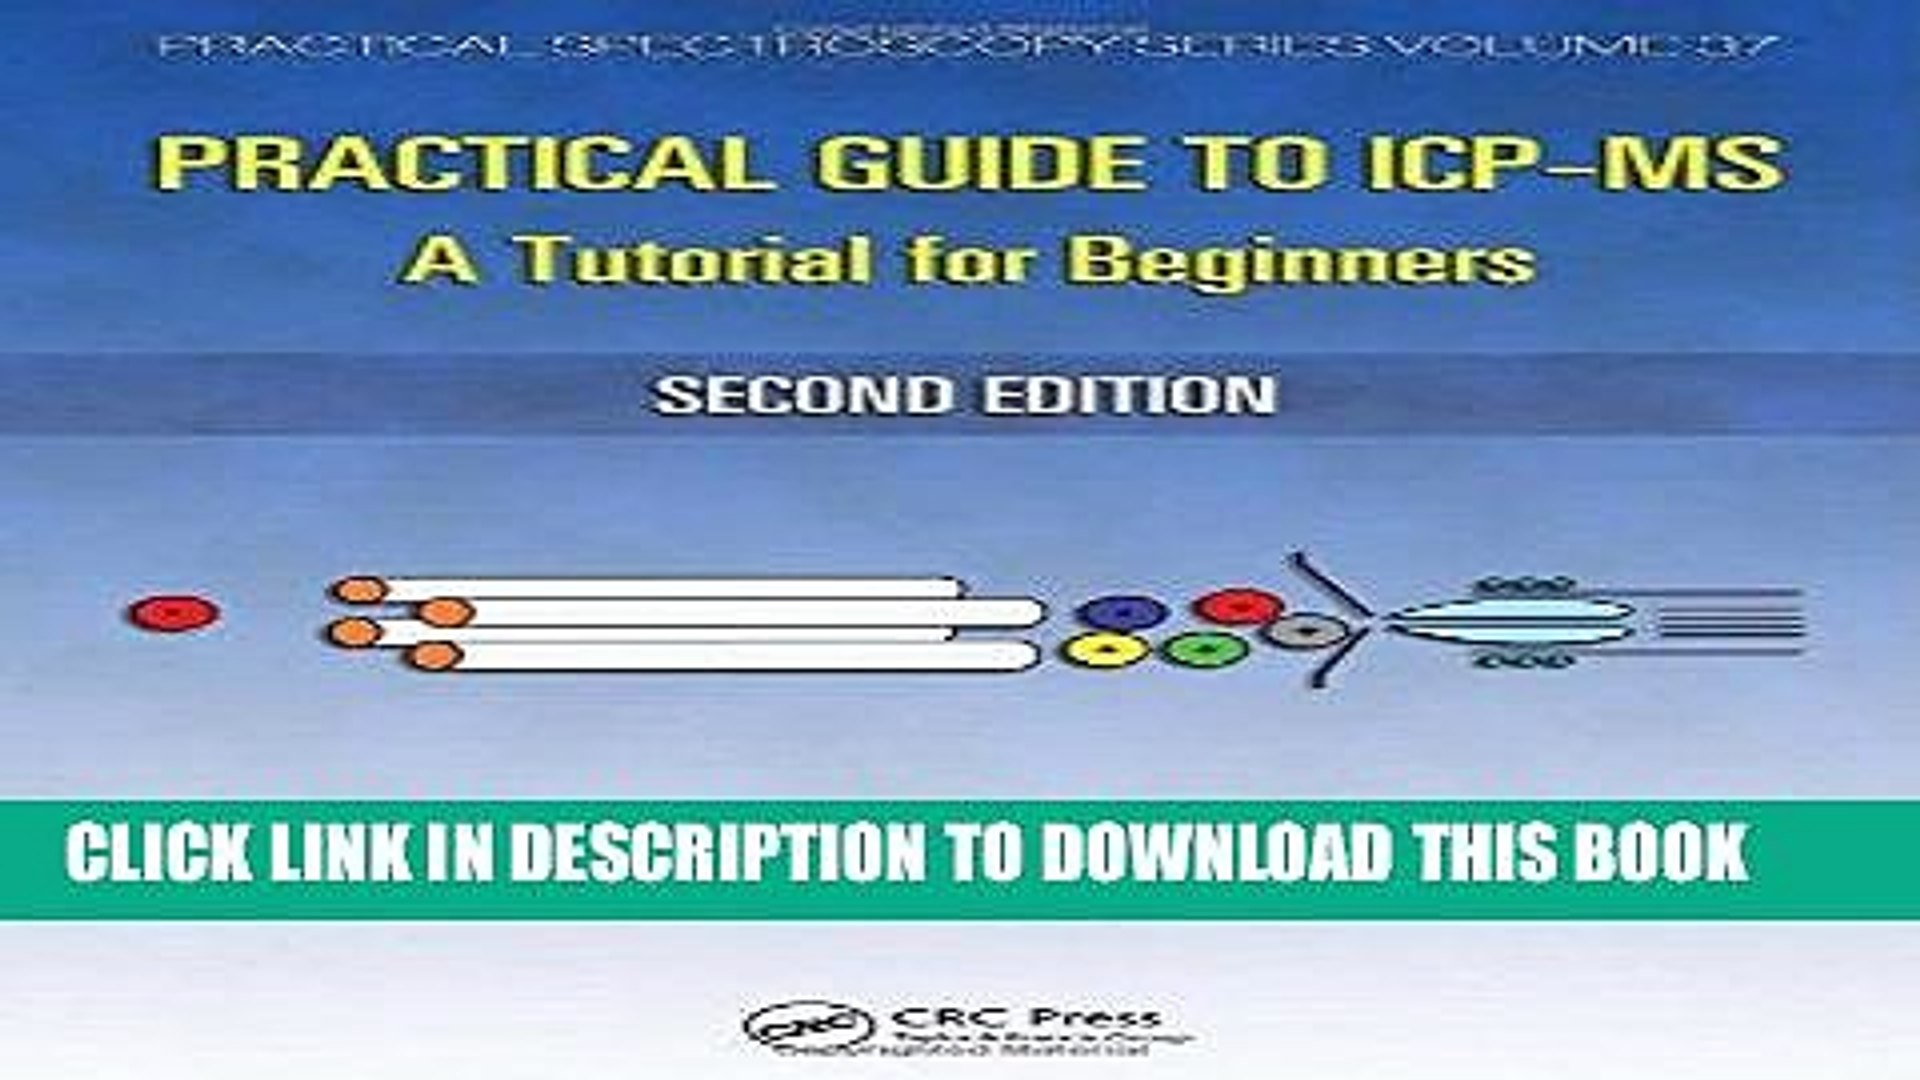 Ebook Practical Guide to ICP-MS: A Tutorial for Beginners, Second Edition (Practical Spectroscopy)